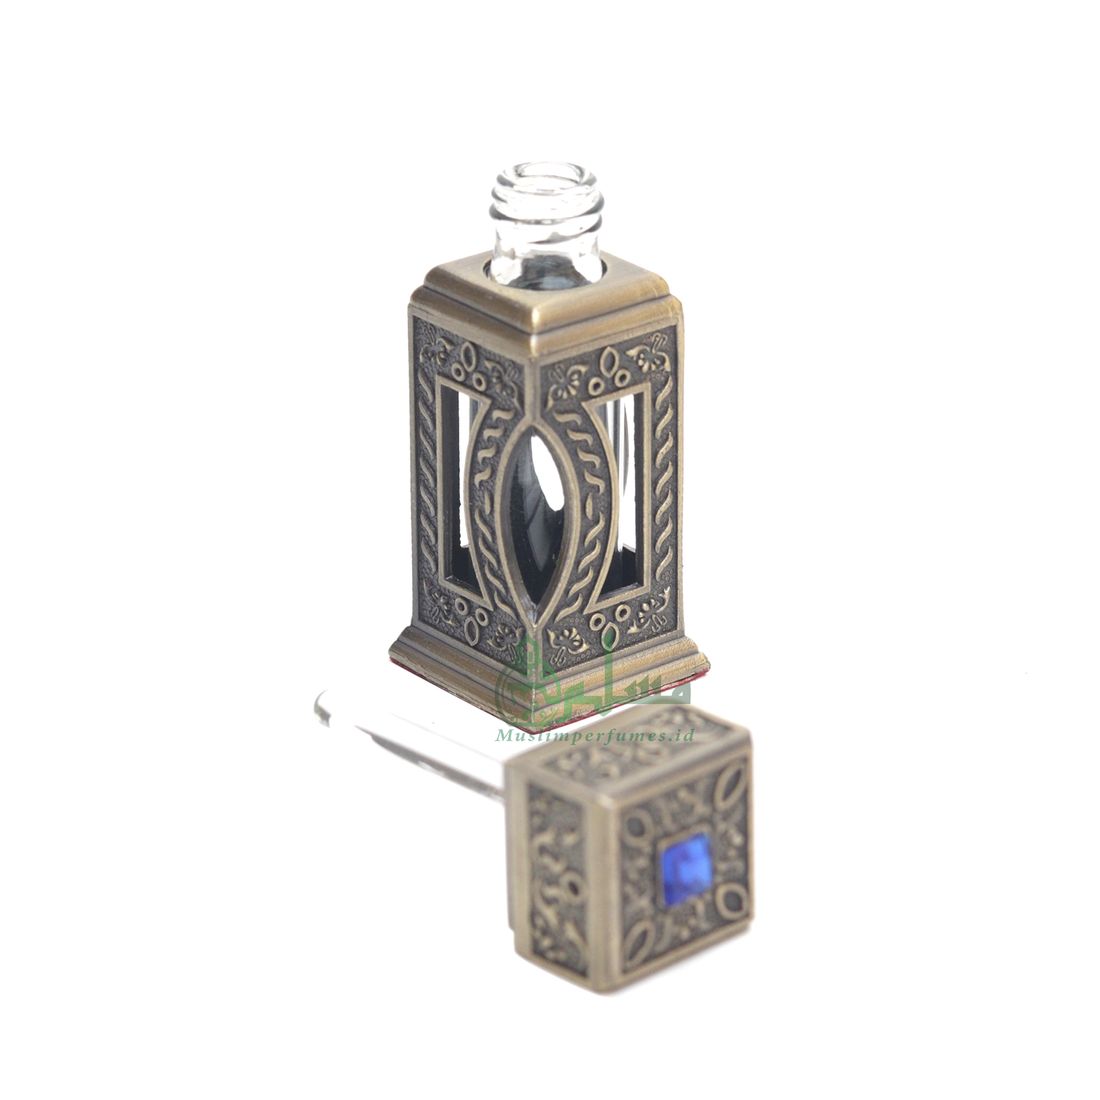 Square Window Islamic DESIGN Brass Color SMALL EMPTY 3-ml Vial Bottle for Perfume Arab Prayer Attar Oud Oil, Pointed Glass Top Dipper Cap